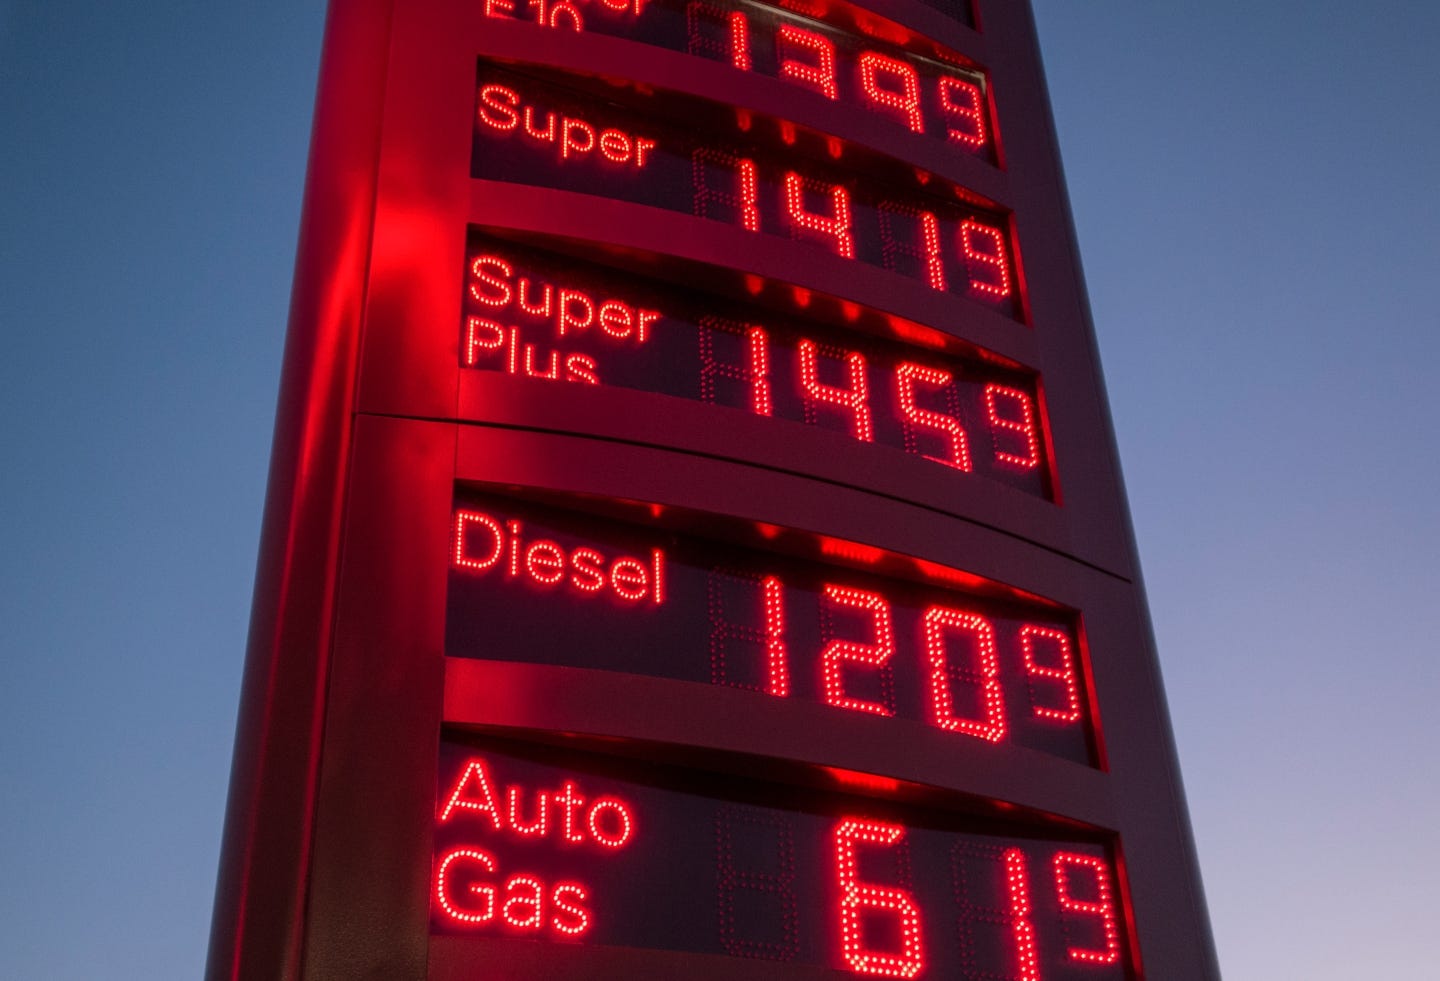 A gas station sign showing fuel prices in Germany